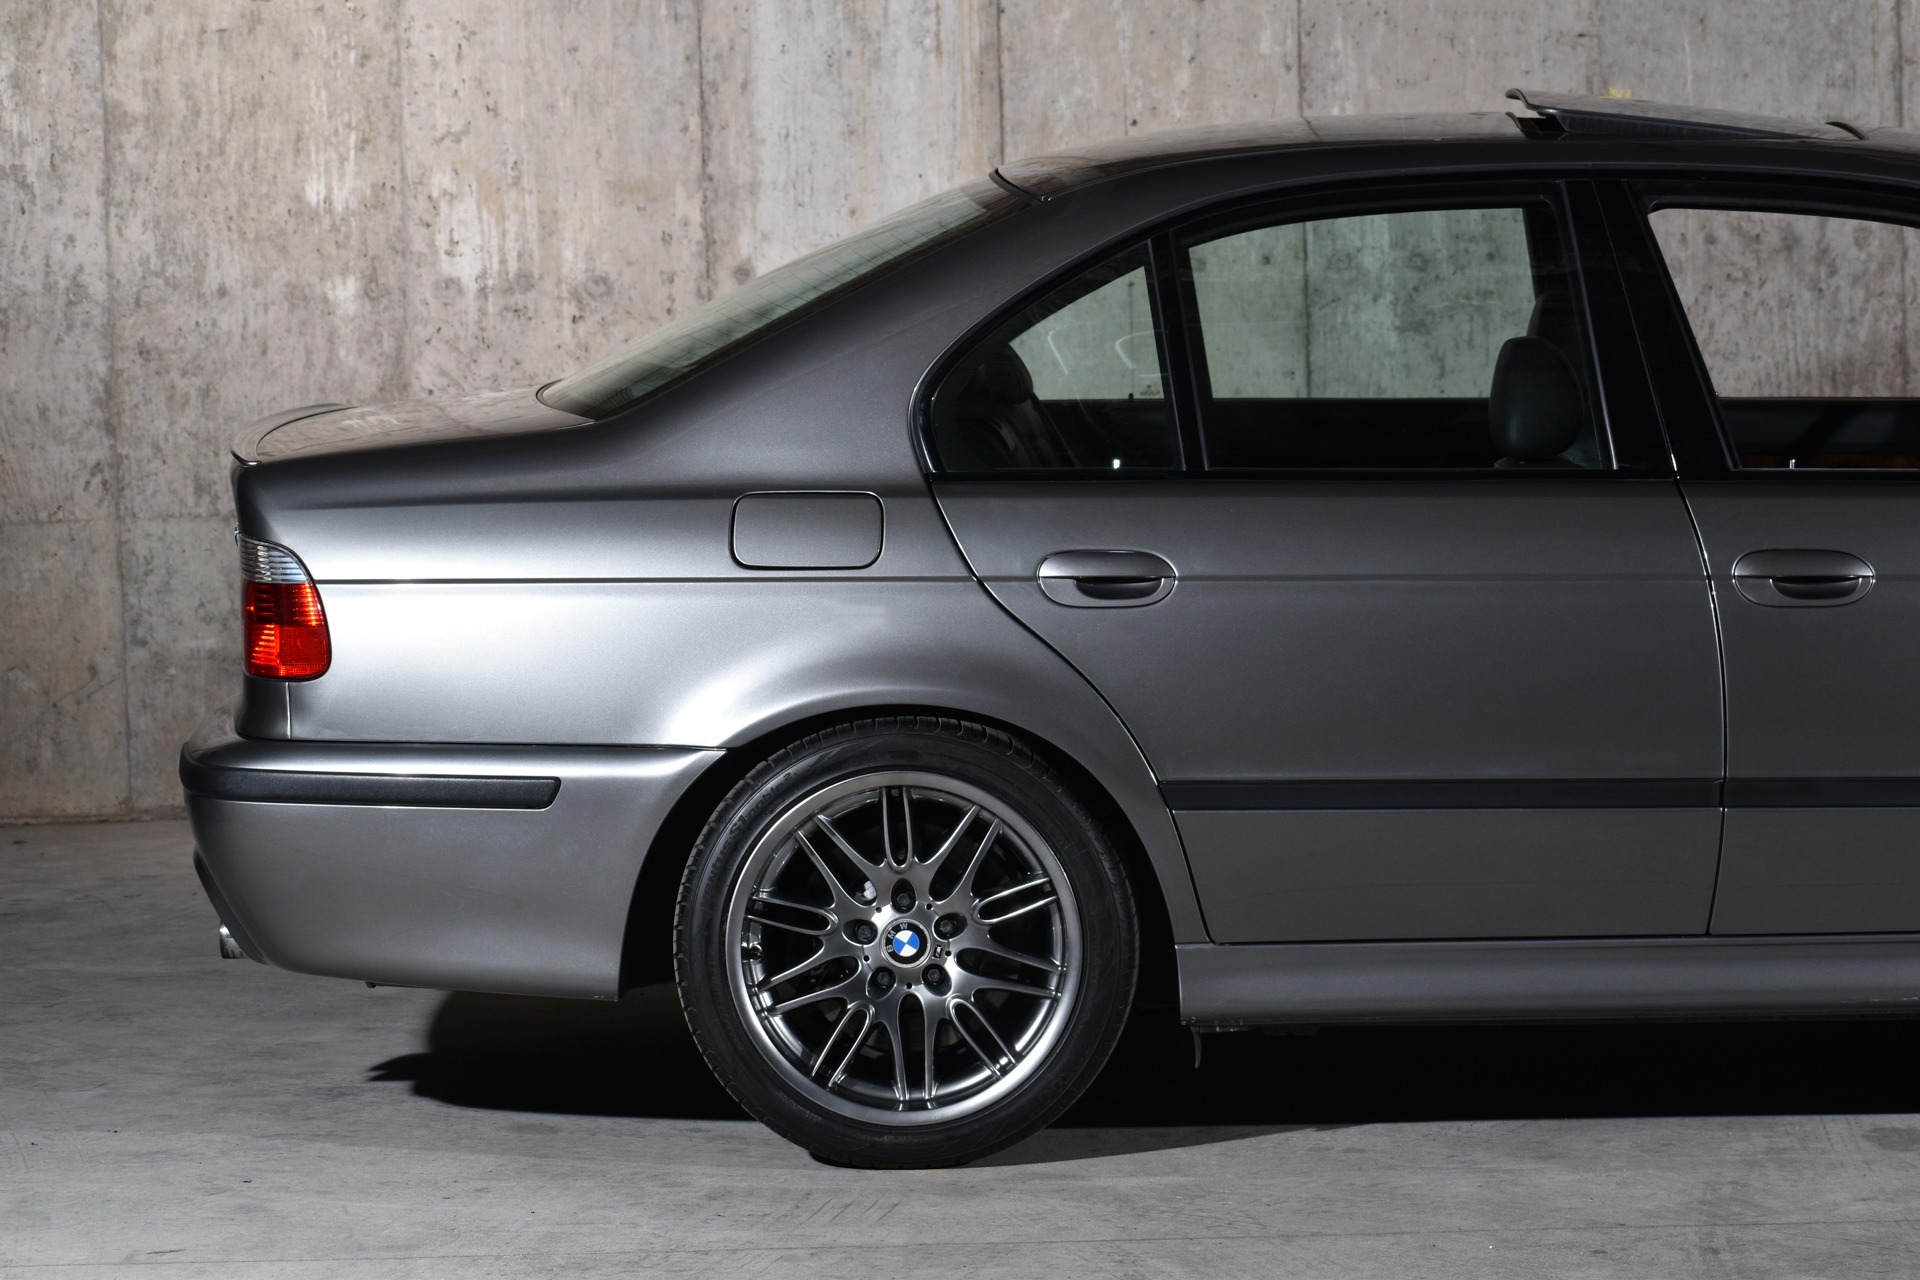 Used 2003 BMW M5 For Sale (Sold)  Acton Auto Boutique Stock #F93895